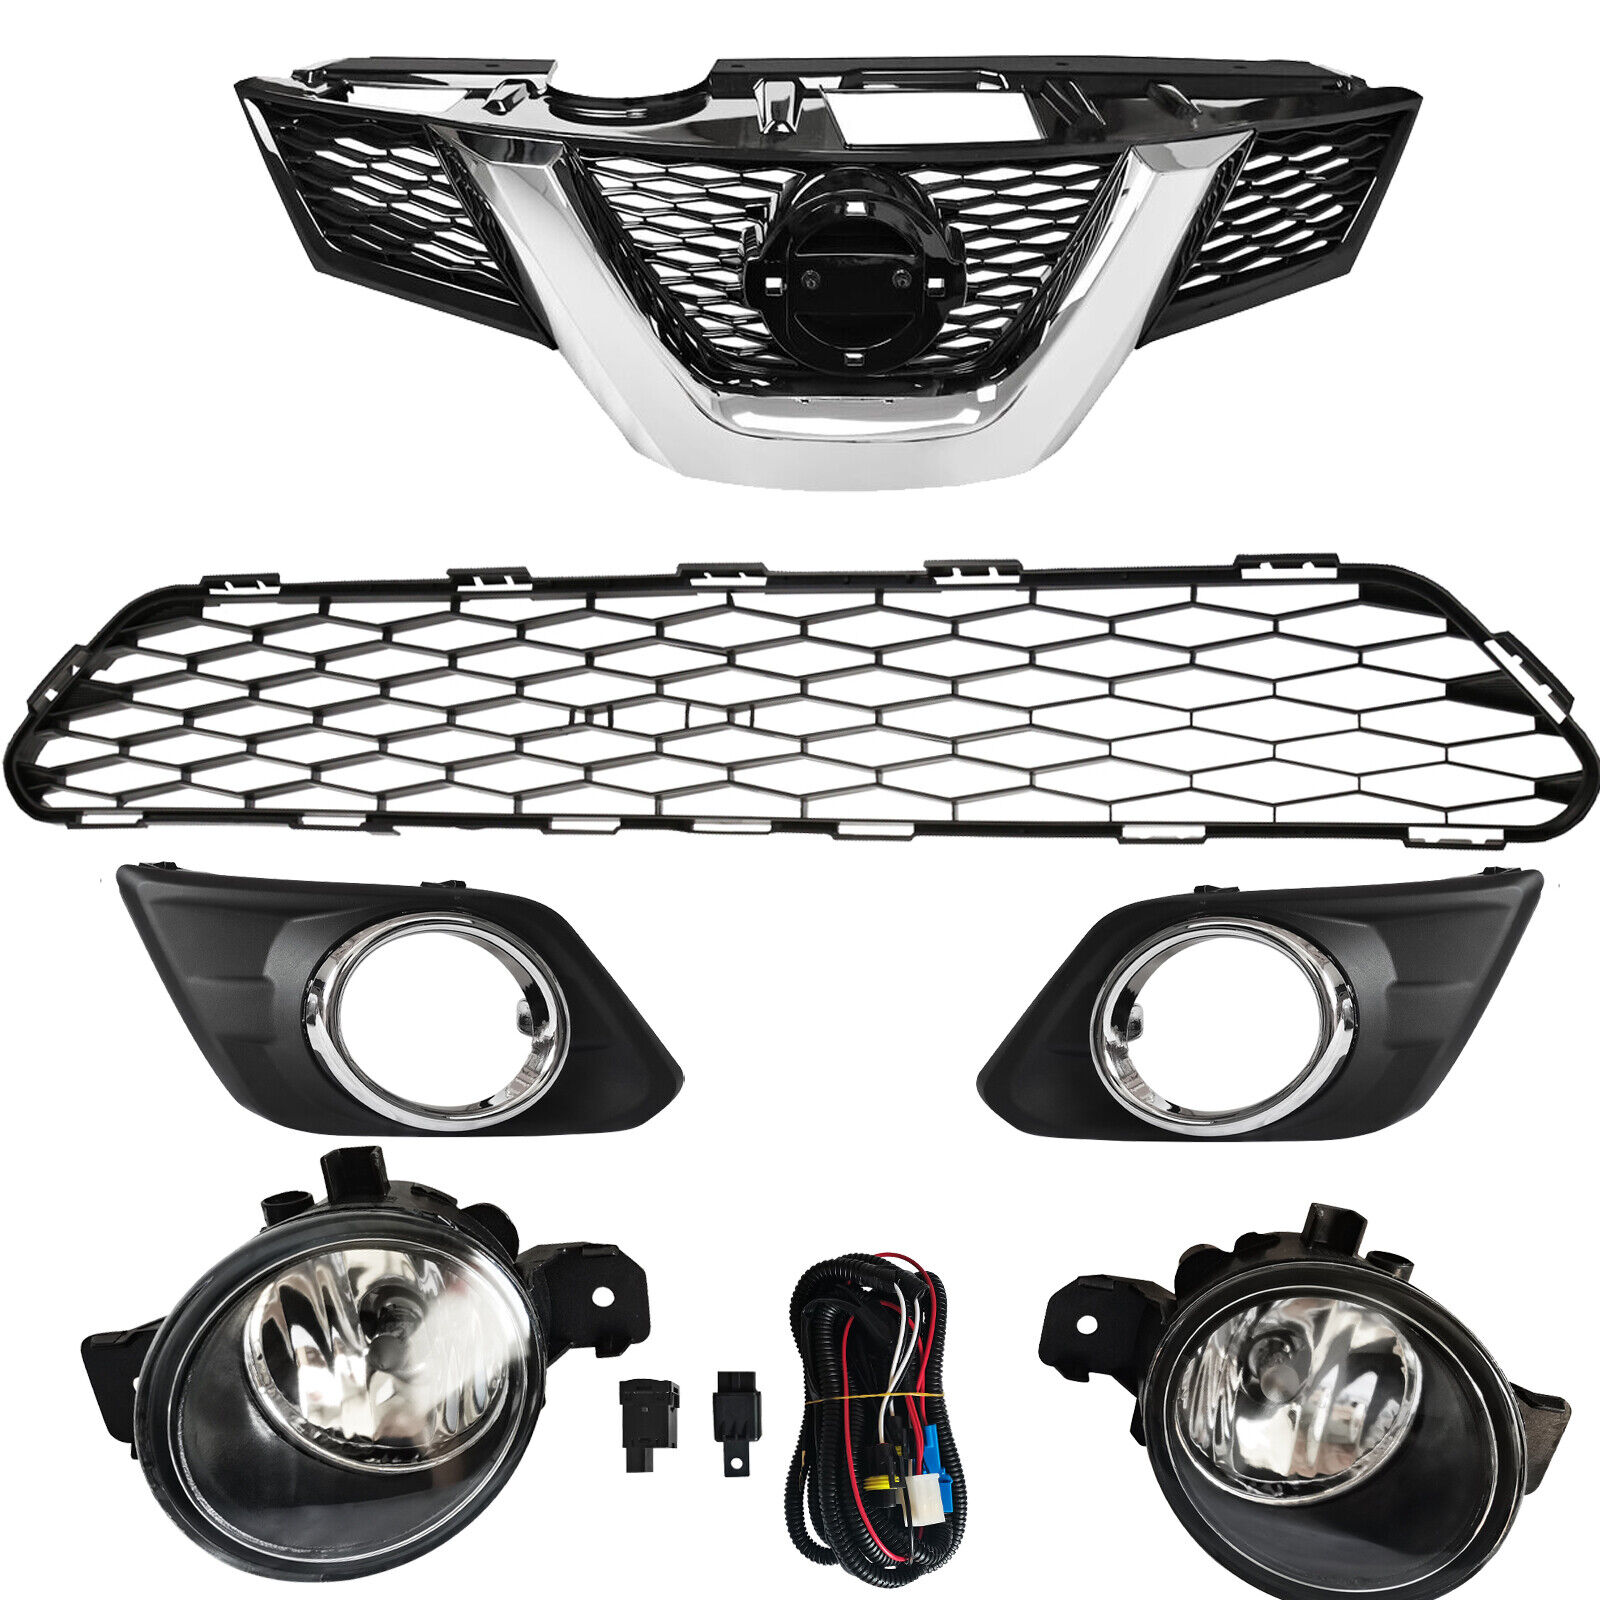 Fits 2014-2016 Nissan Rogue Front Upper and Lower Grille and Fog Light Kit Set